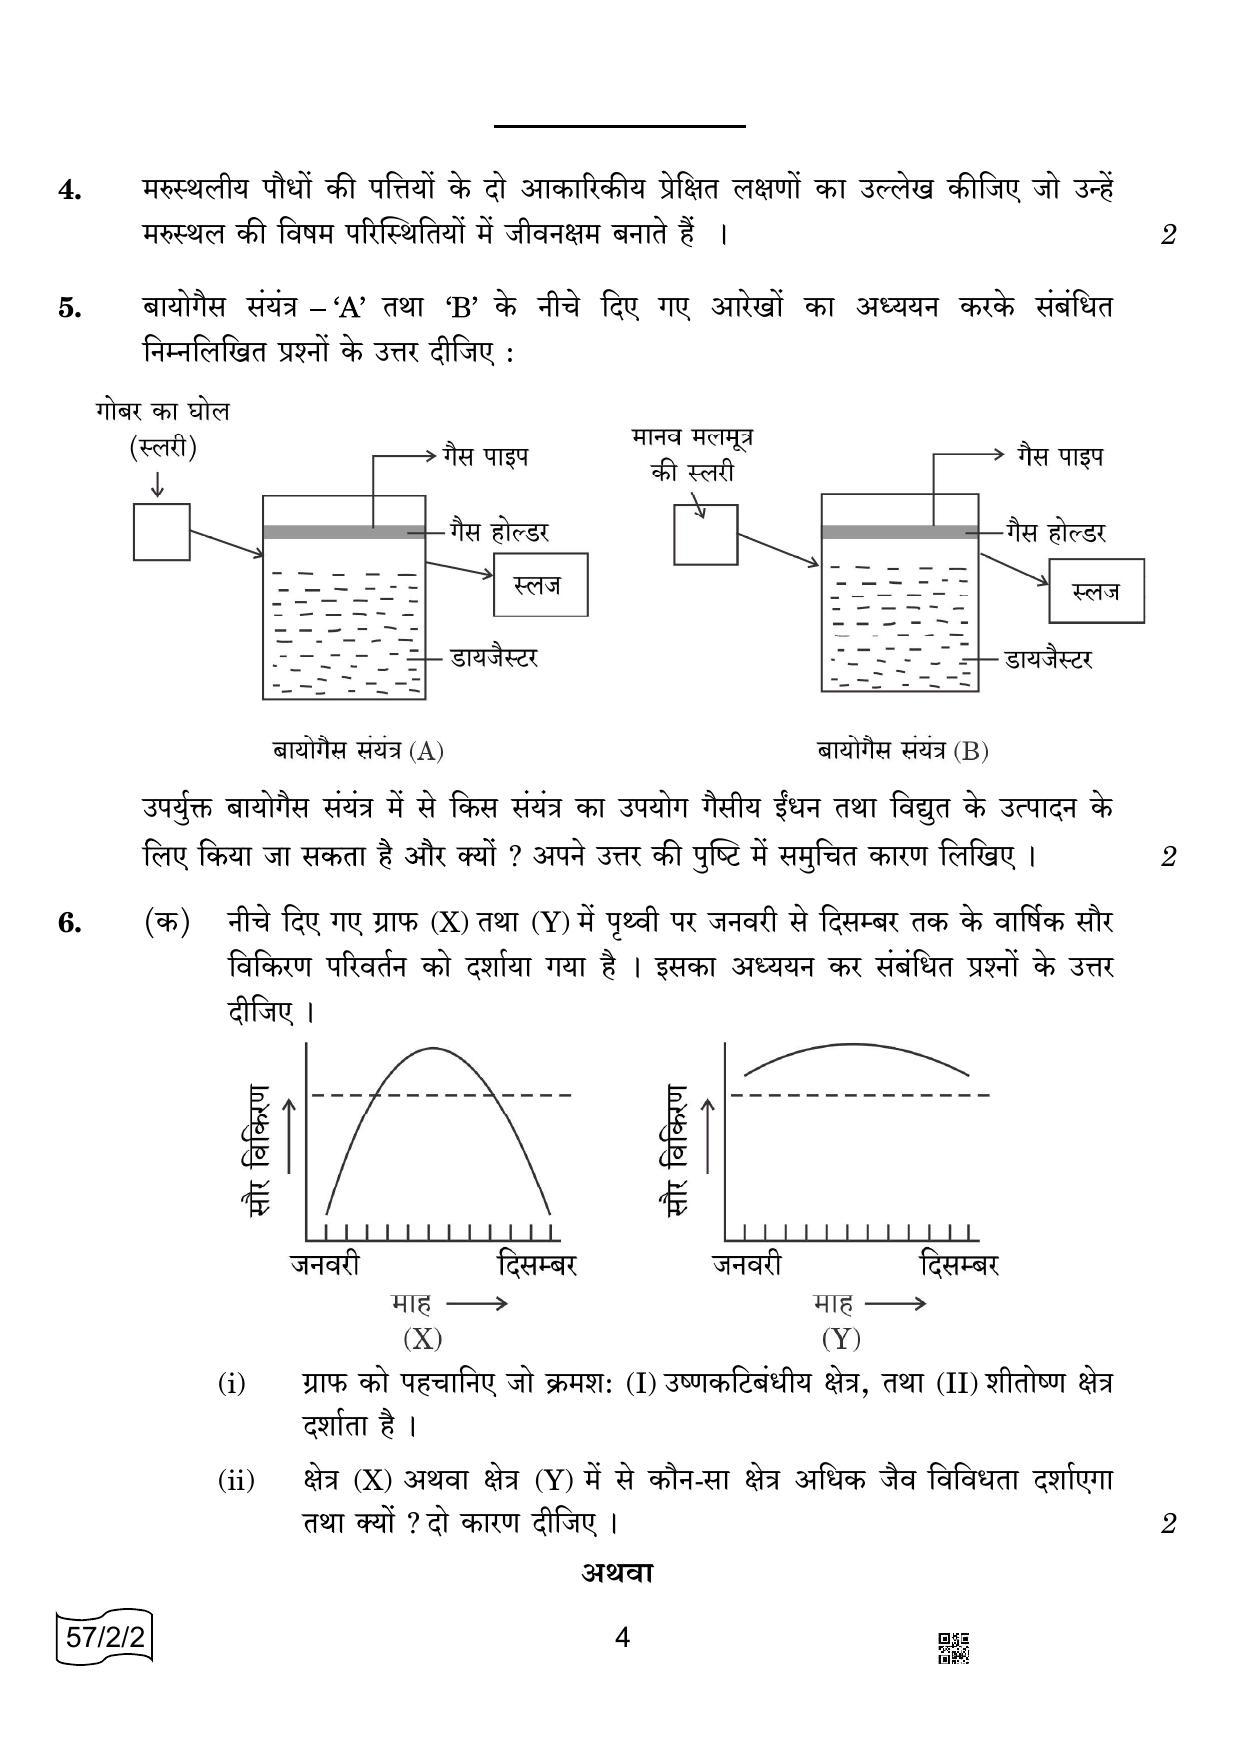 CBSE Class 12 57-2-2 Biology 2022 Question Paper - Page 4